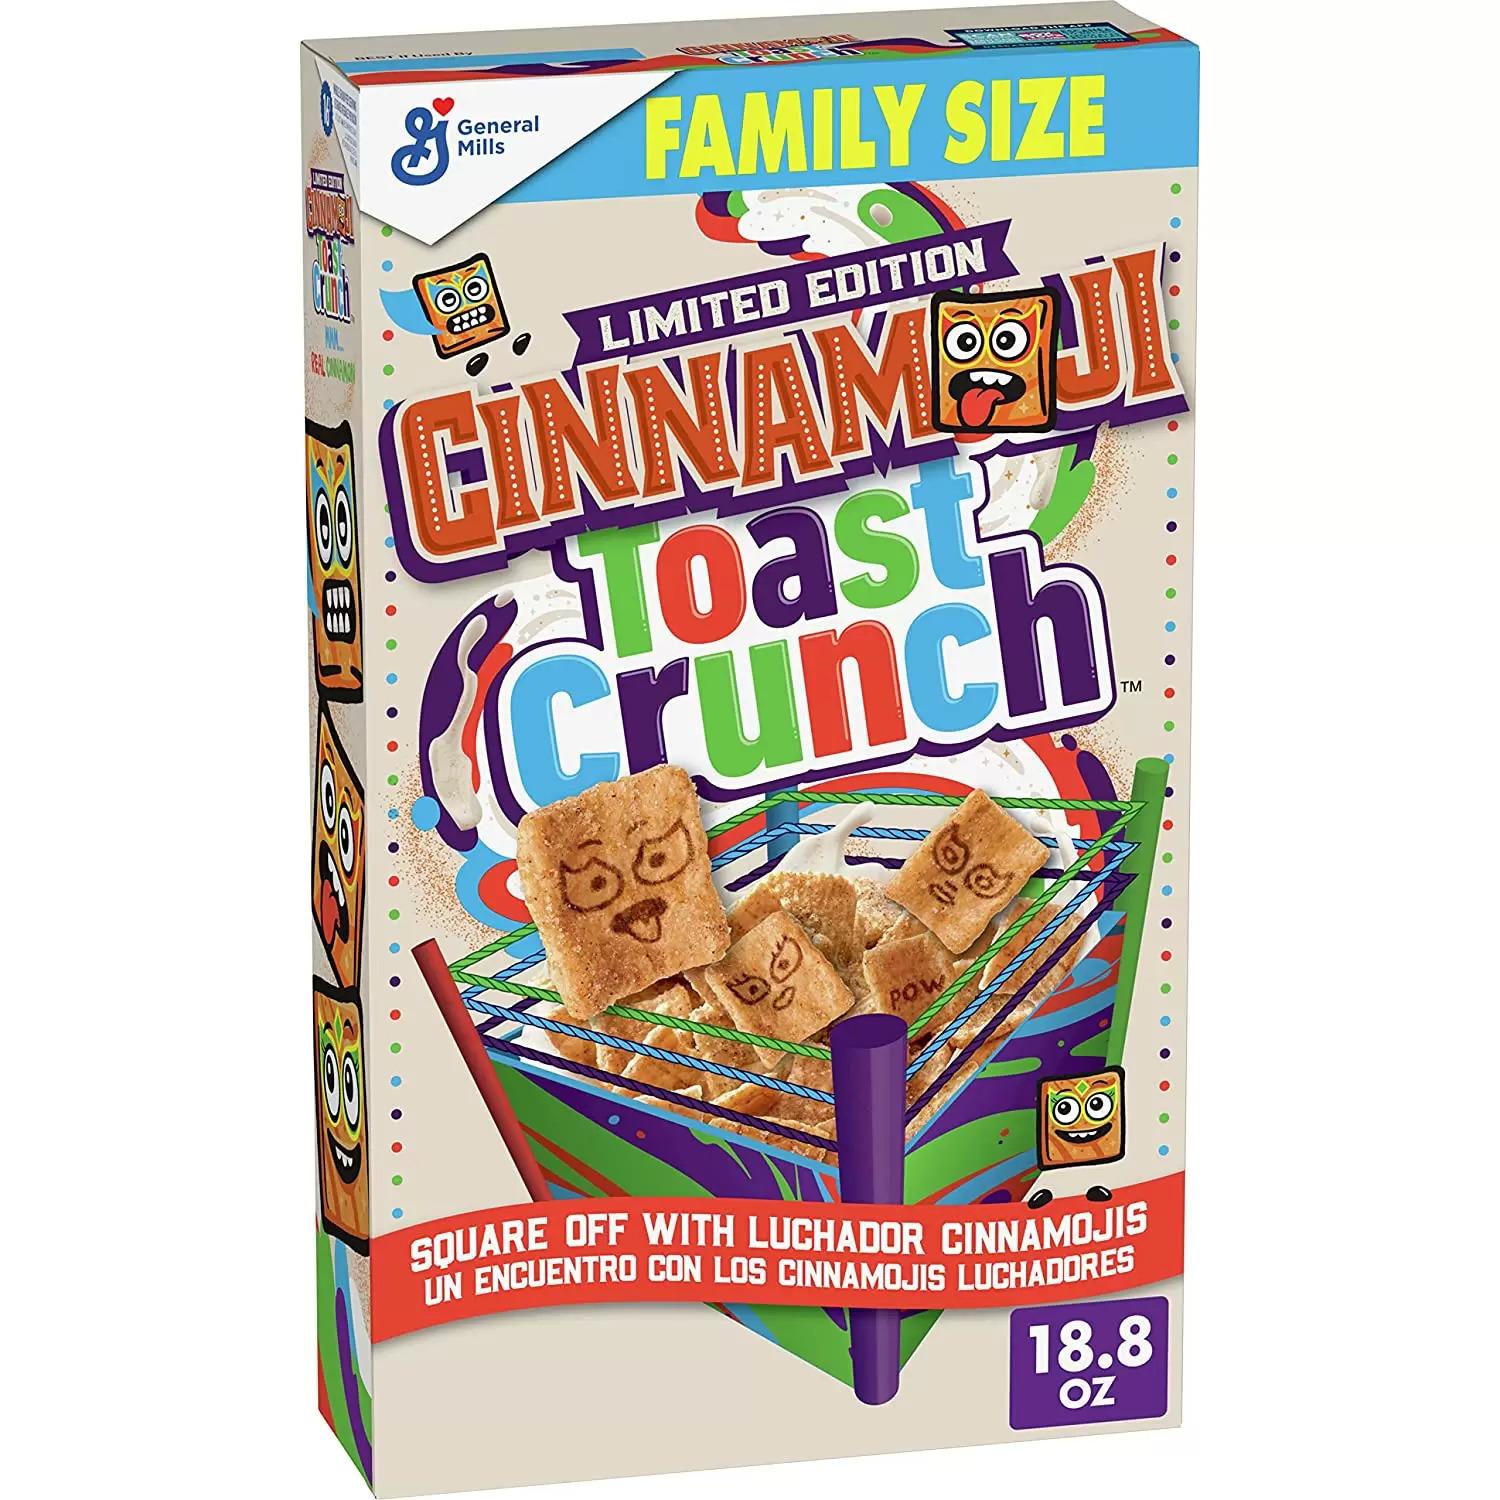 Original Cinnamon Toast Crunch Breakfast Cereal for $2.93 Shipped